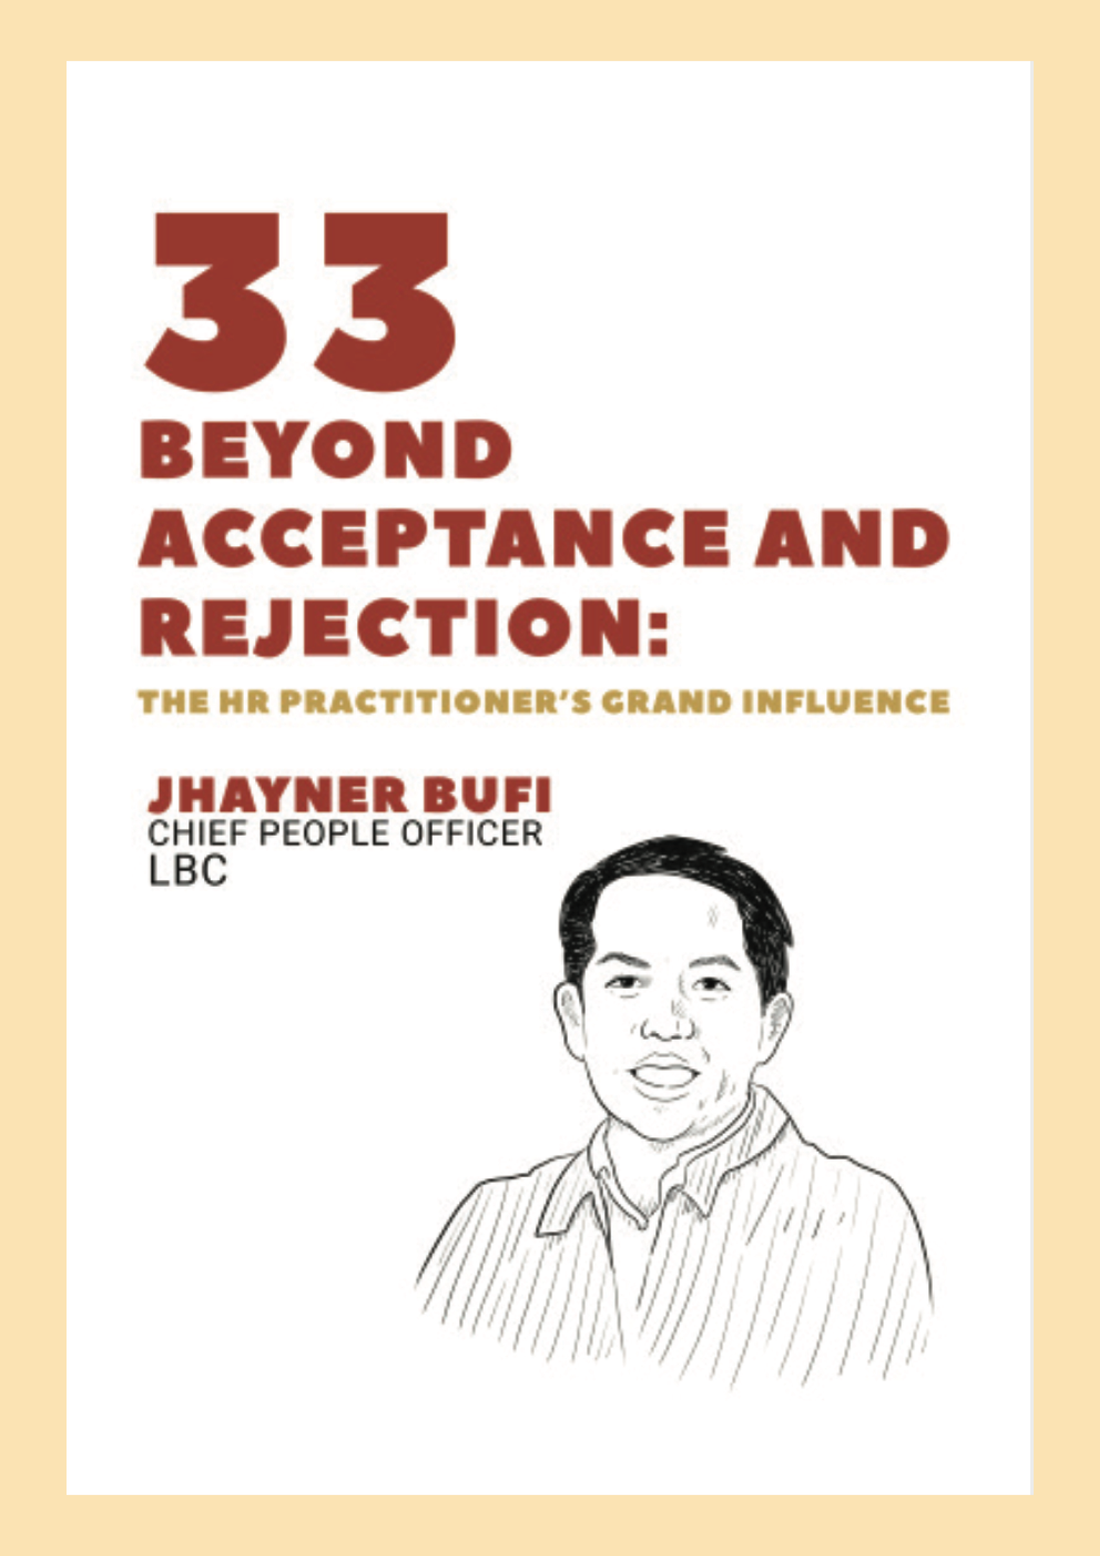 Beyond Acceptance and Rejection: The HR Practitioner's Grand Influence